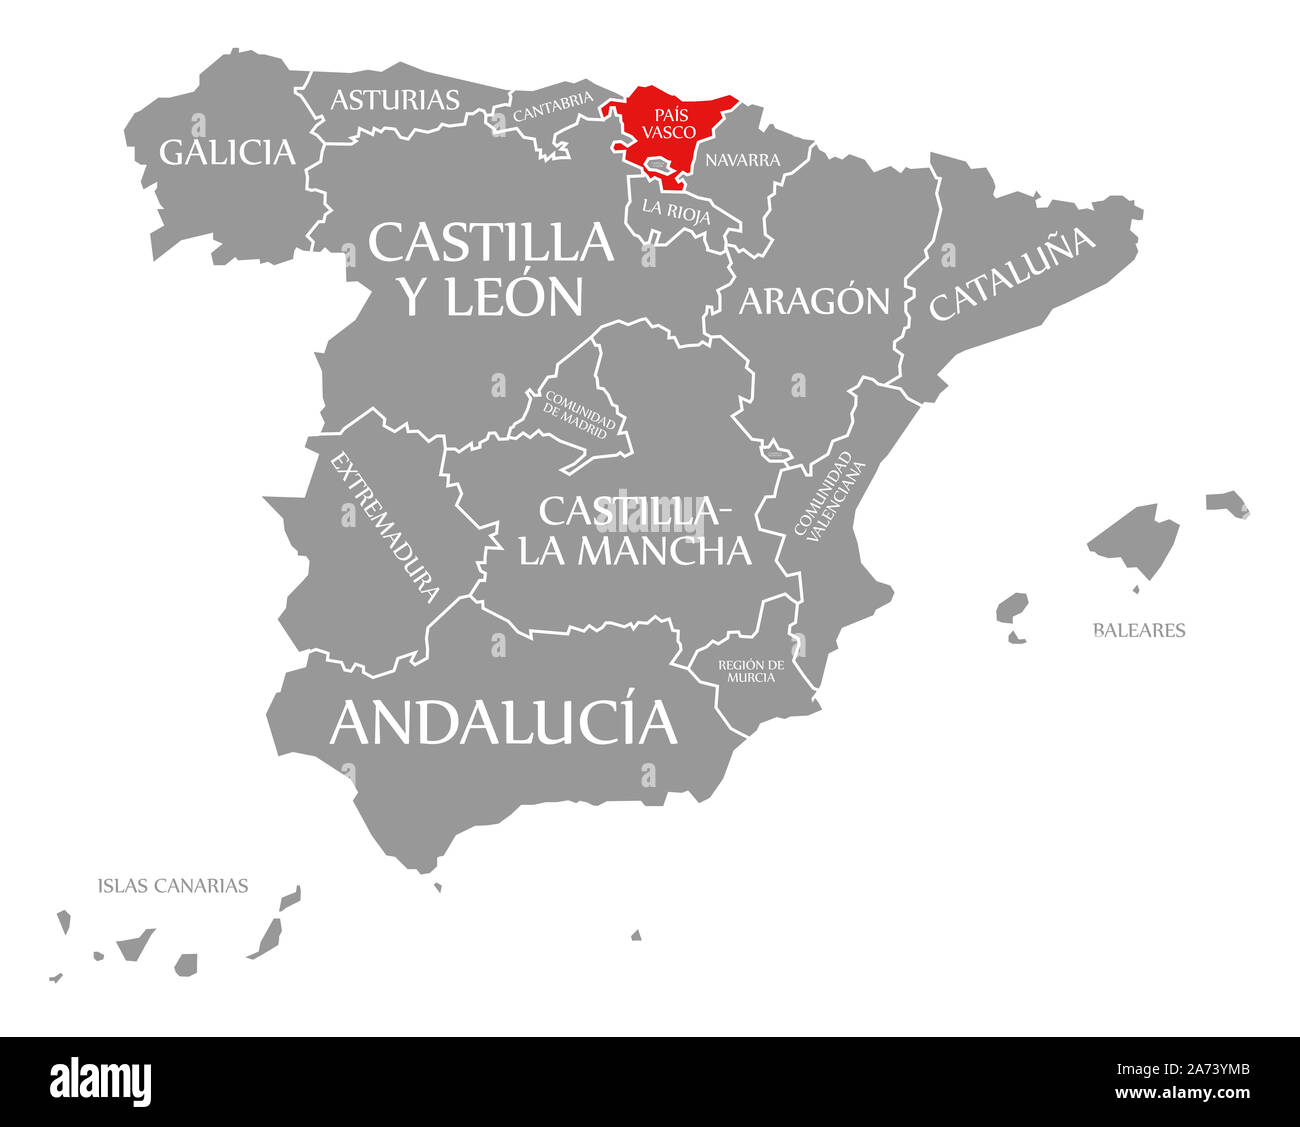 Basque Autonomous Community red highlighted in map of Spain Stock Photo